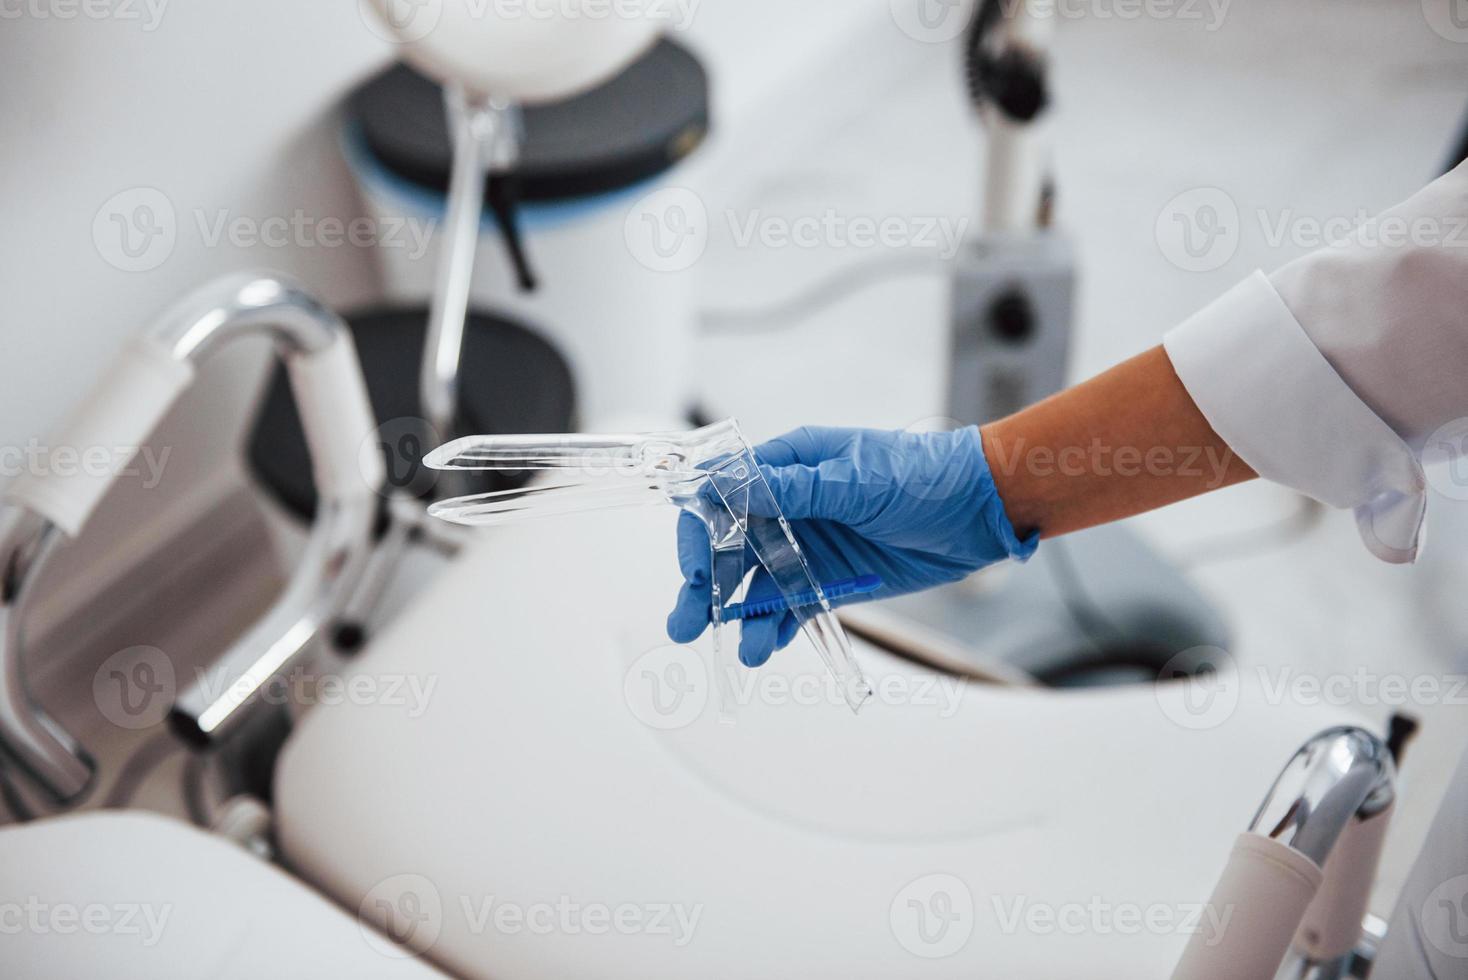 Close up view of female doctor hands that holds speculum instrument photo